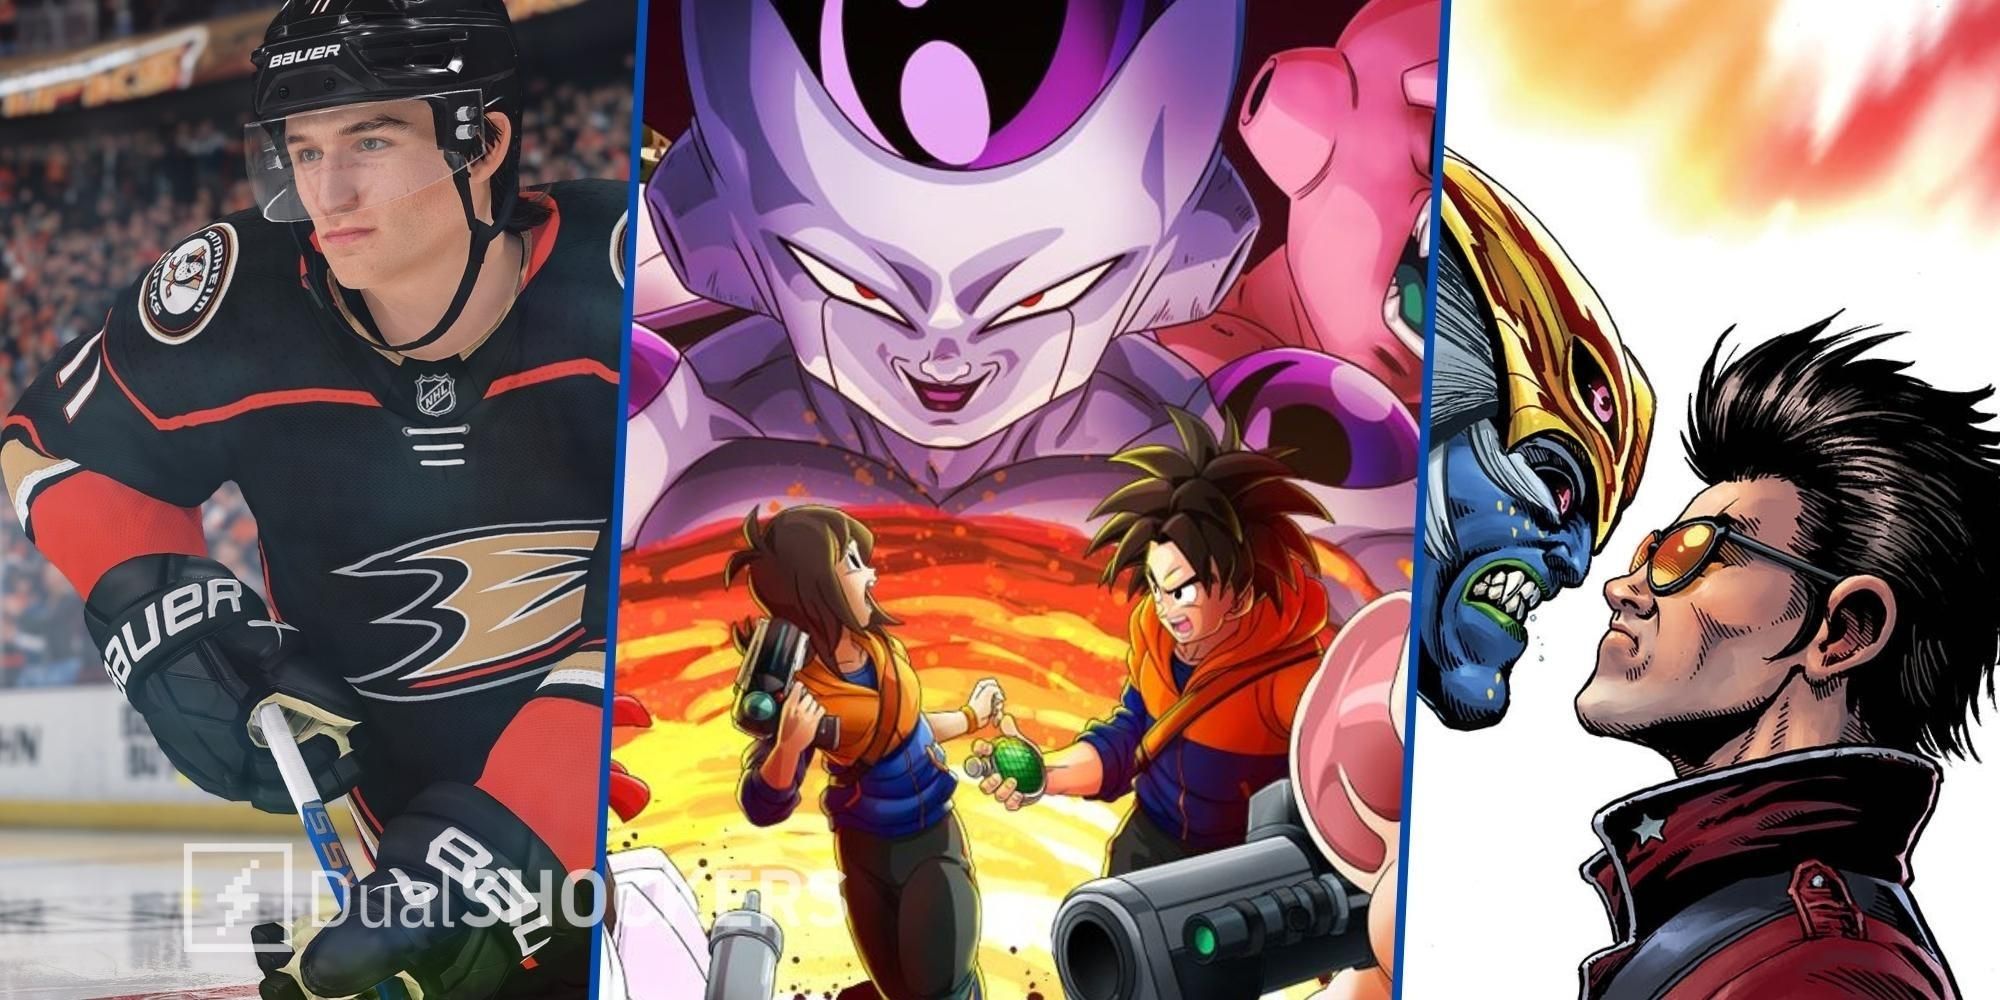 no more heroes, dragon ball breakers, and nhl 23 lead the new games on playstation this week